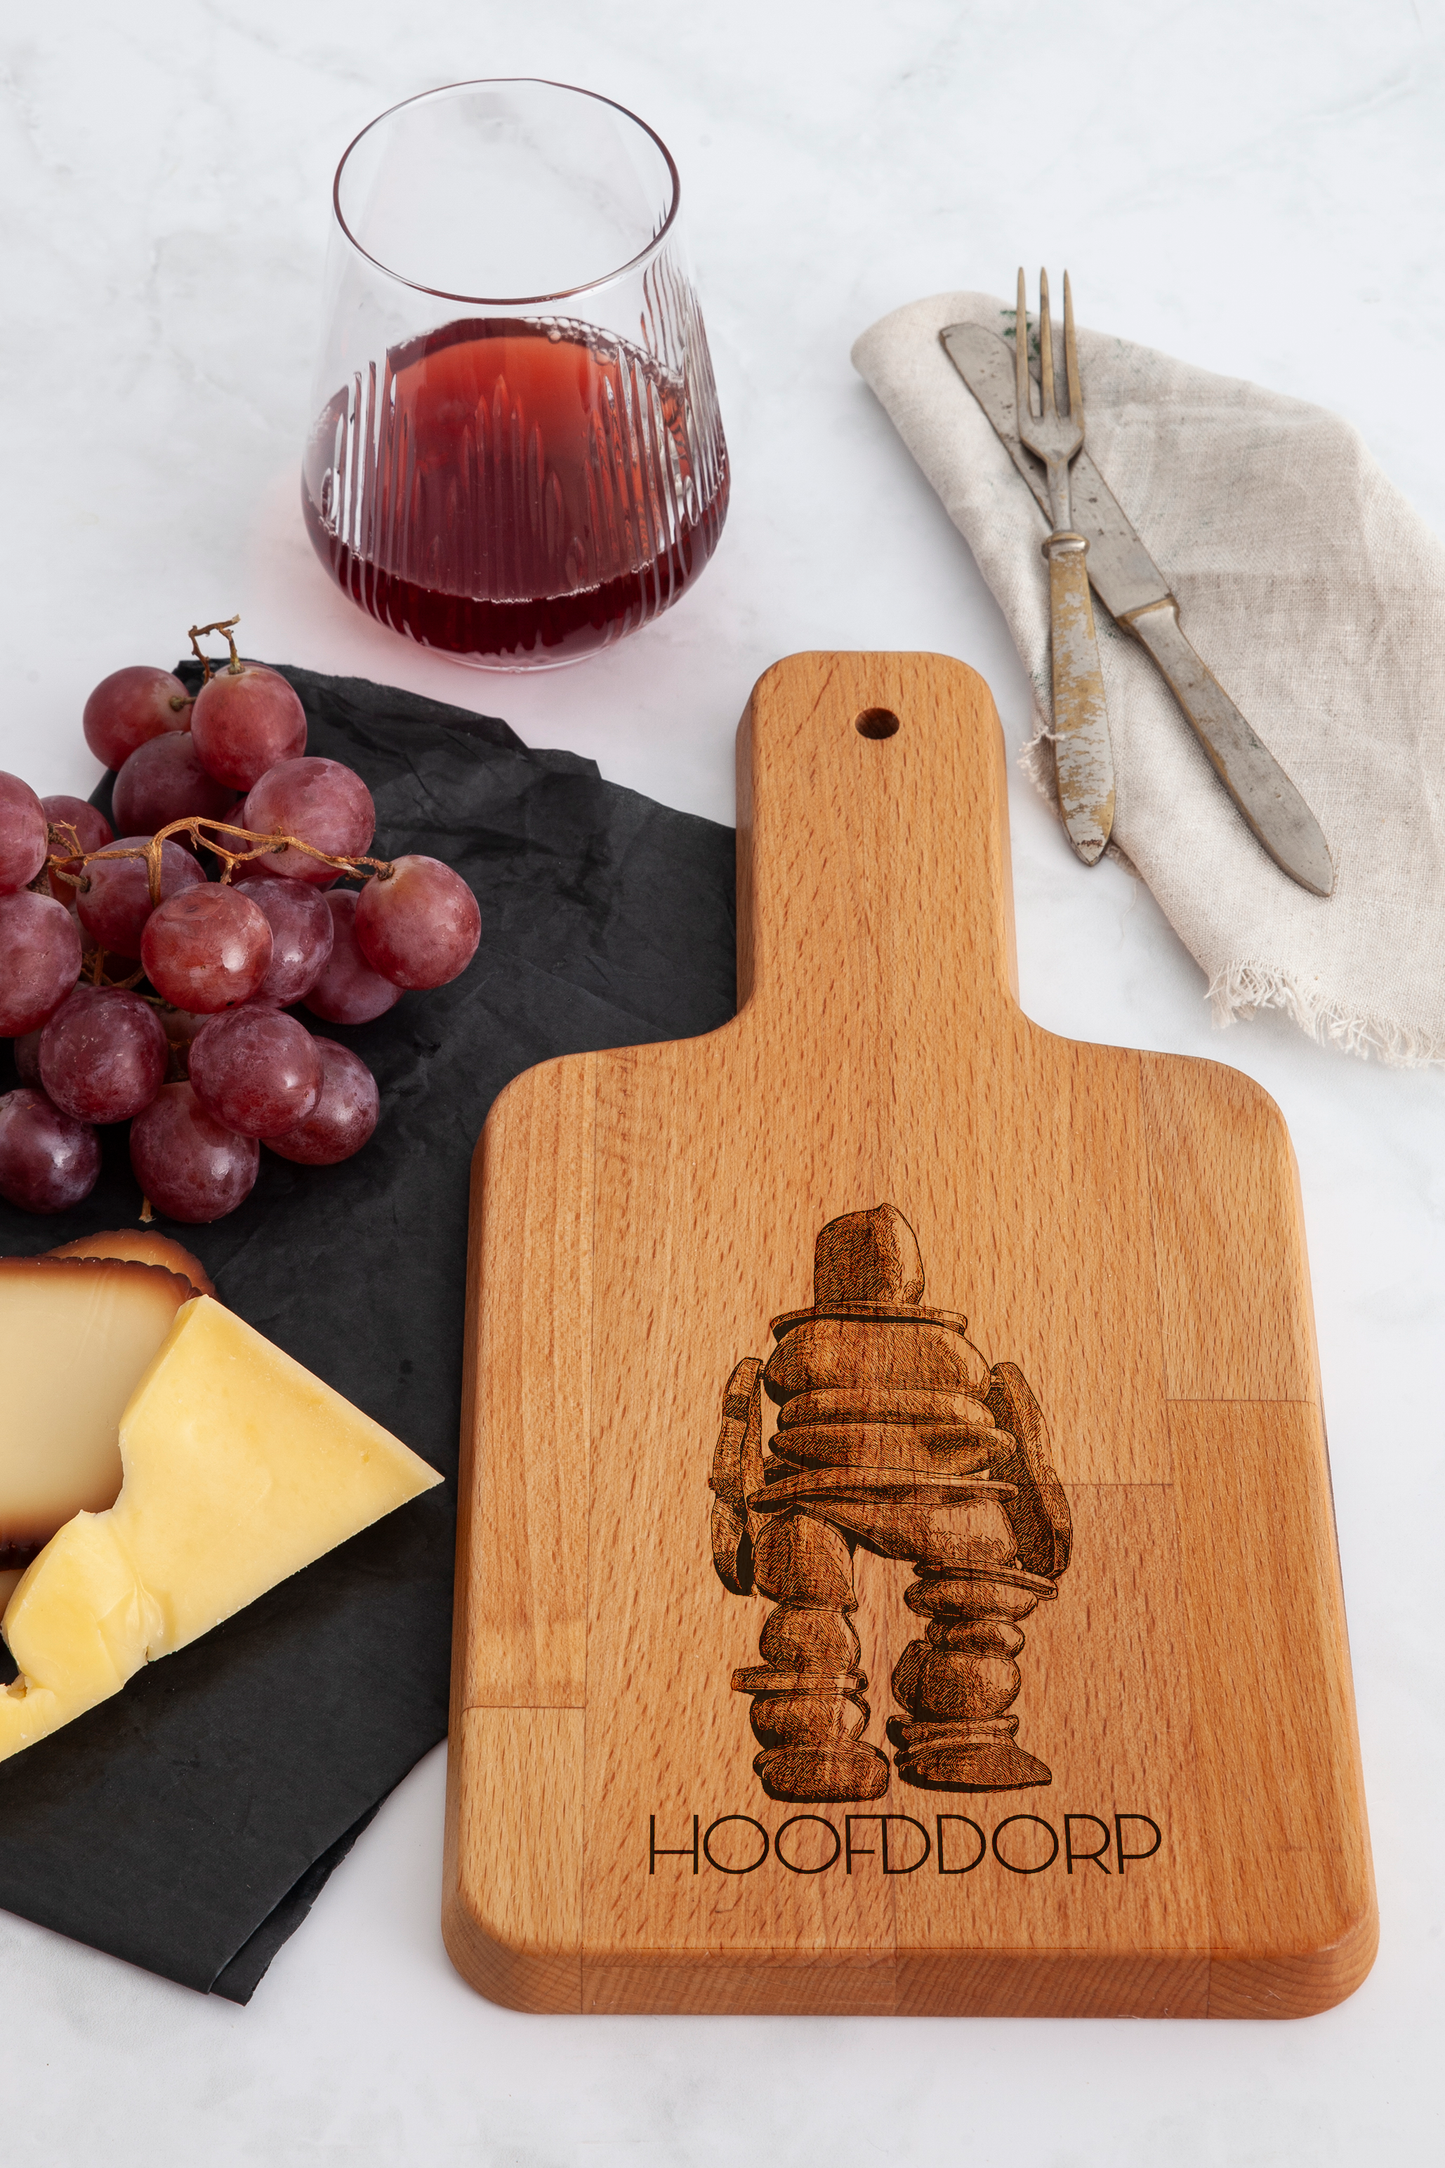 Hoofddorp, Mannetje, cheese board, on countertop